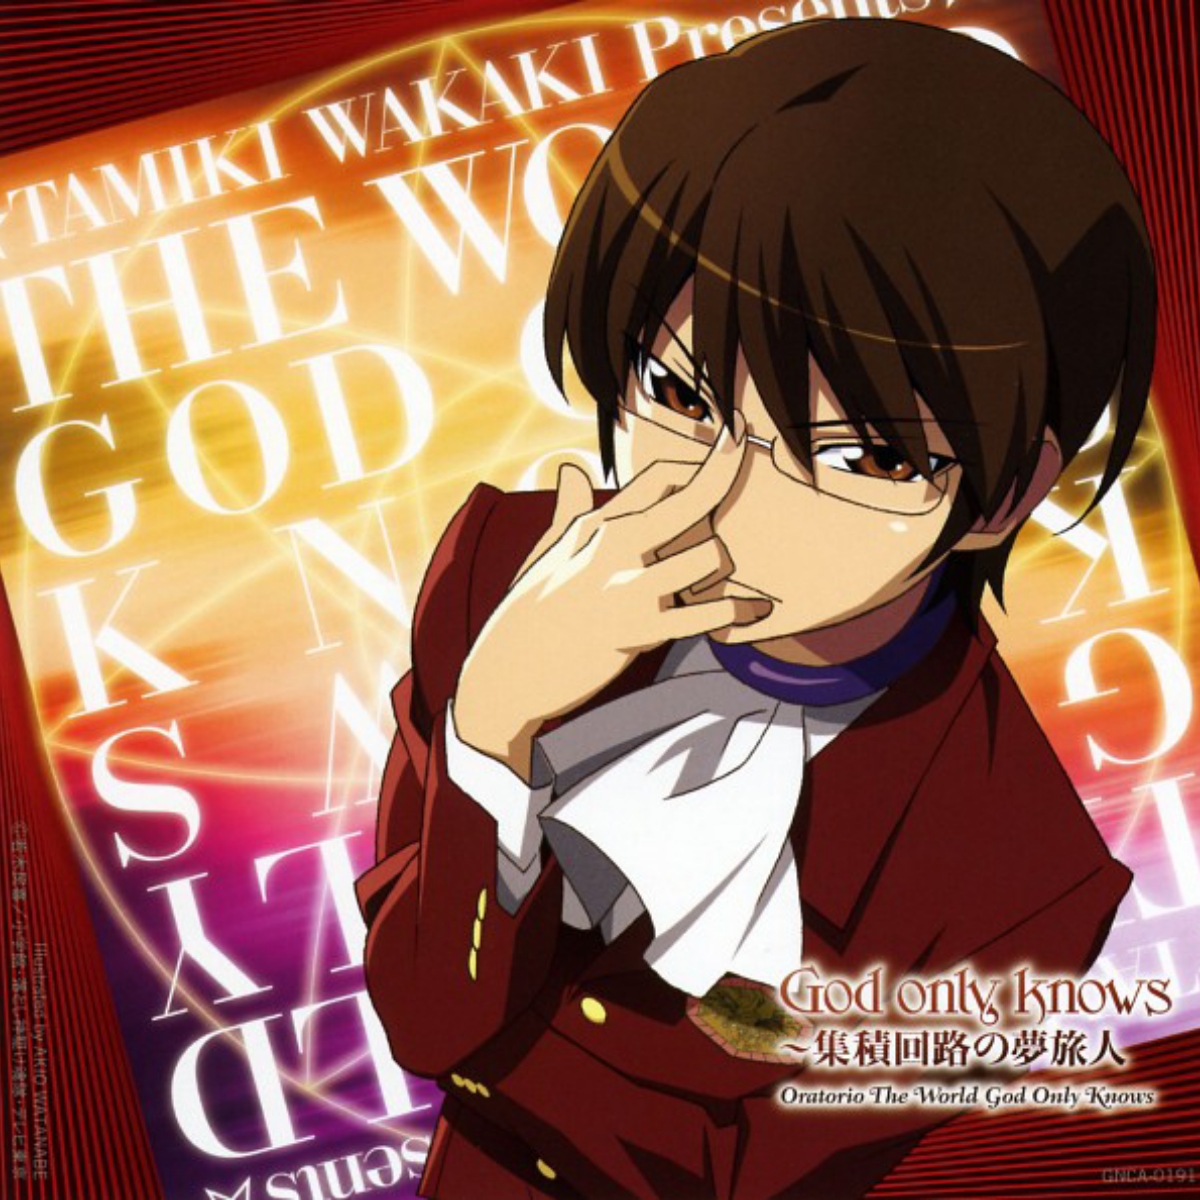 A Whole New World God Only Knows - God only knows Daisanmaku